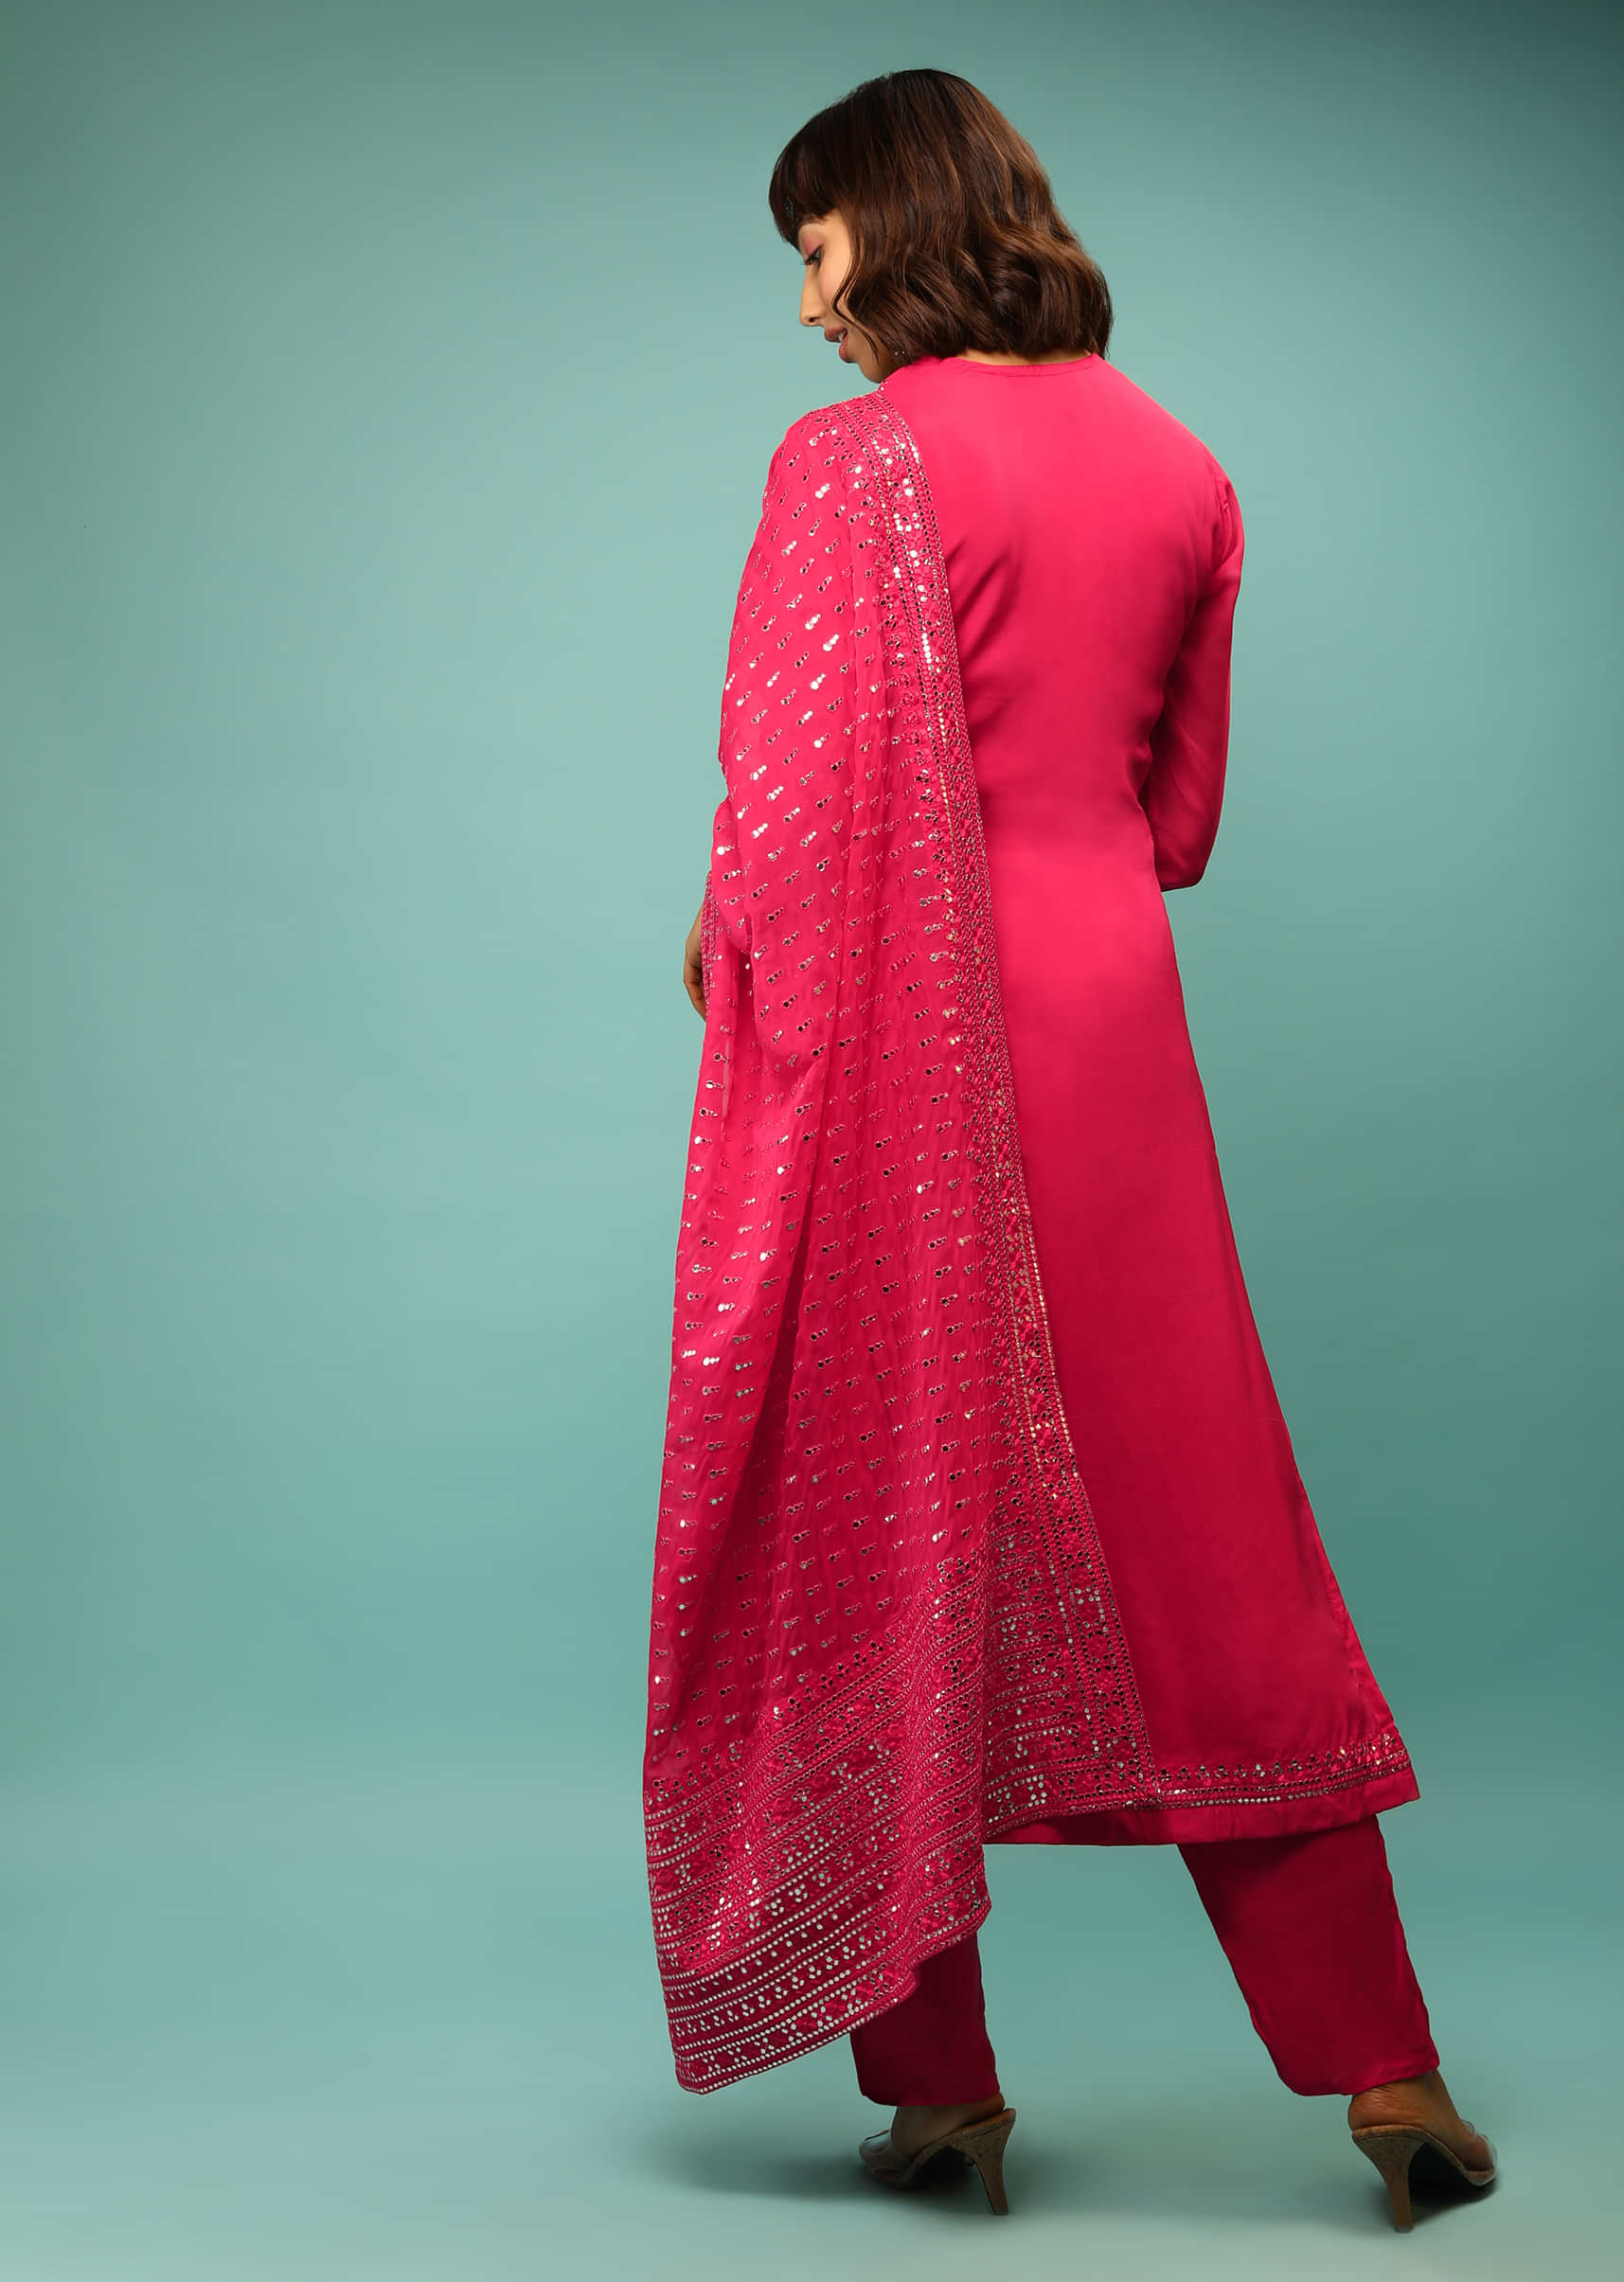 Hot Pink Straight Cut Suit With Full Sleeves And Mirror Embroidered Floral Buttis 